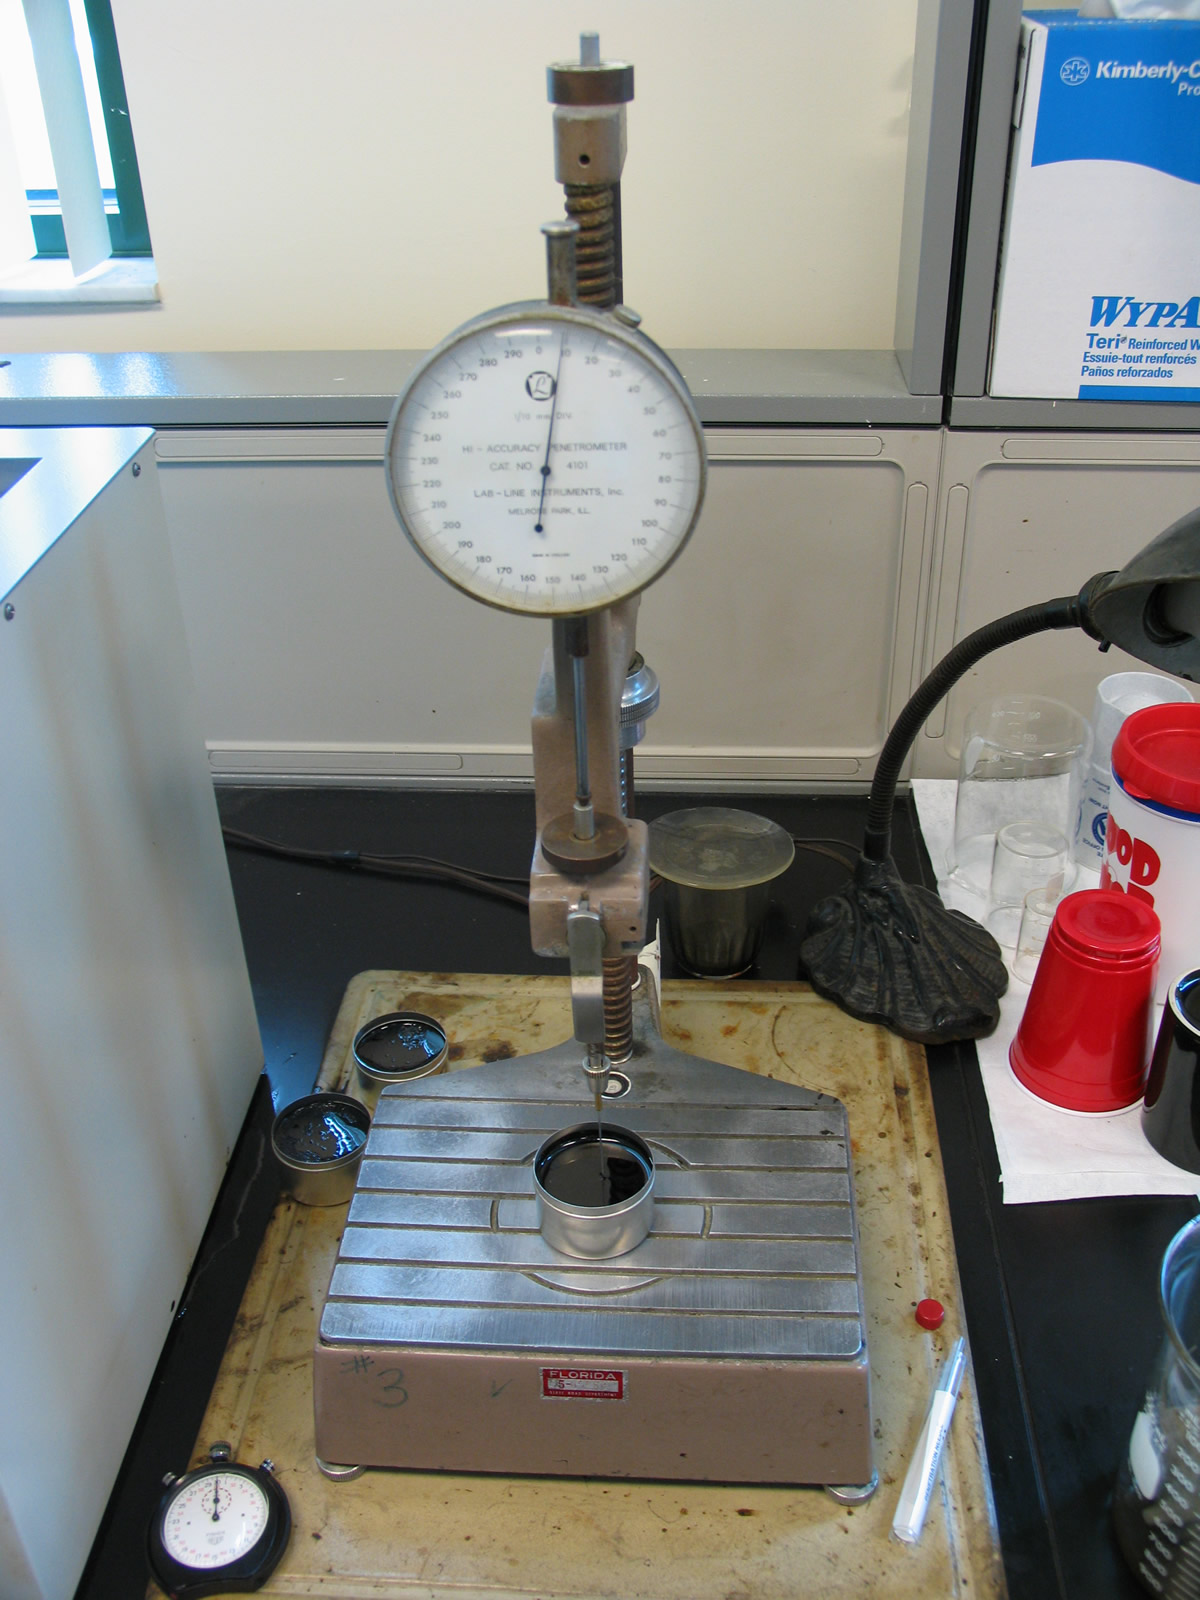 Penetration test apparatus in a laboratory setting